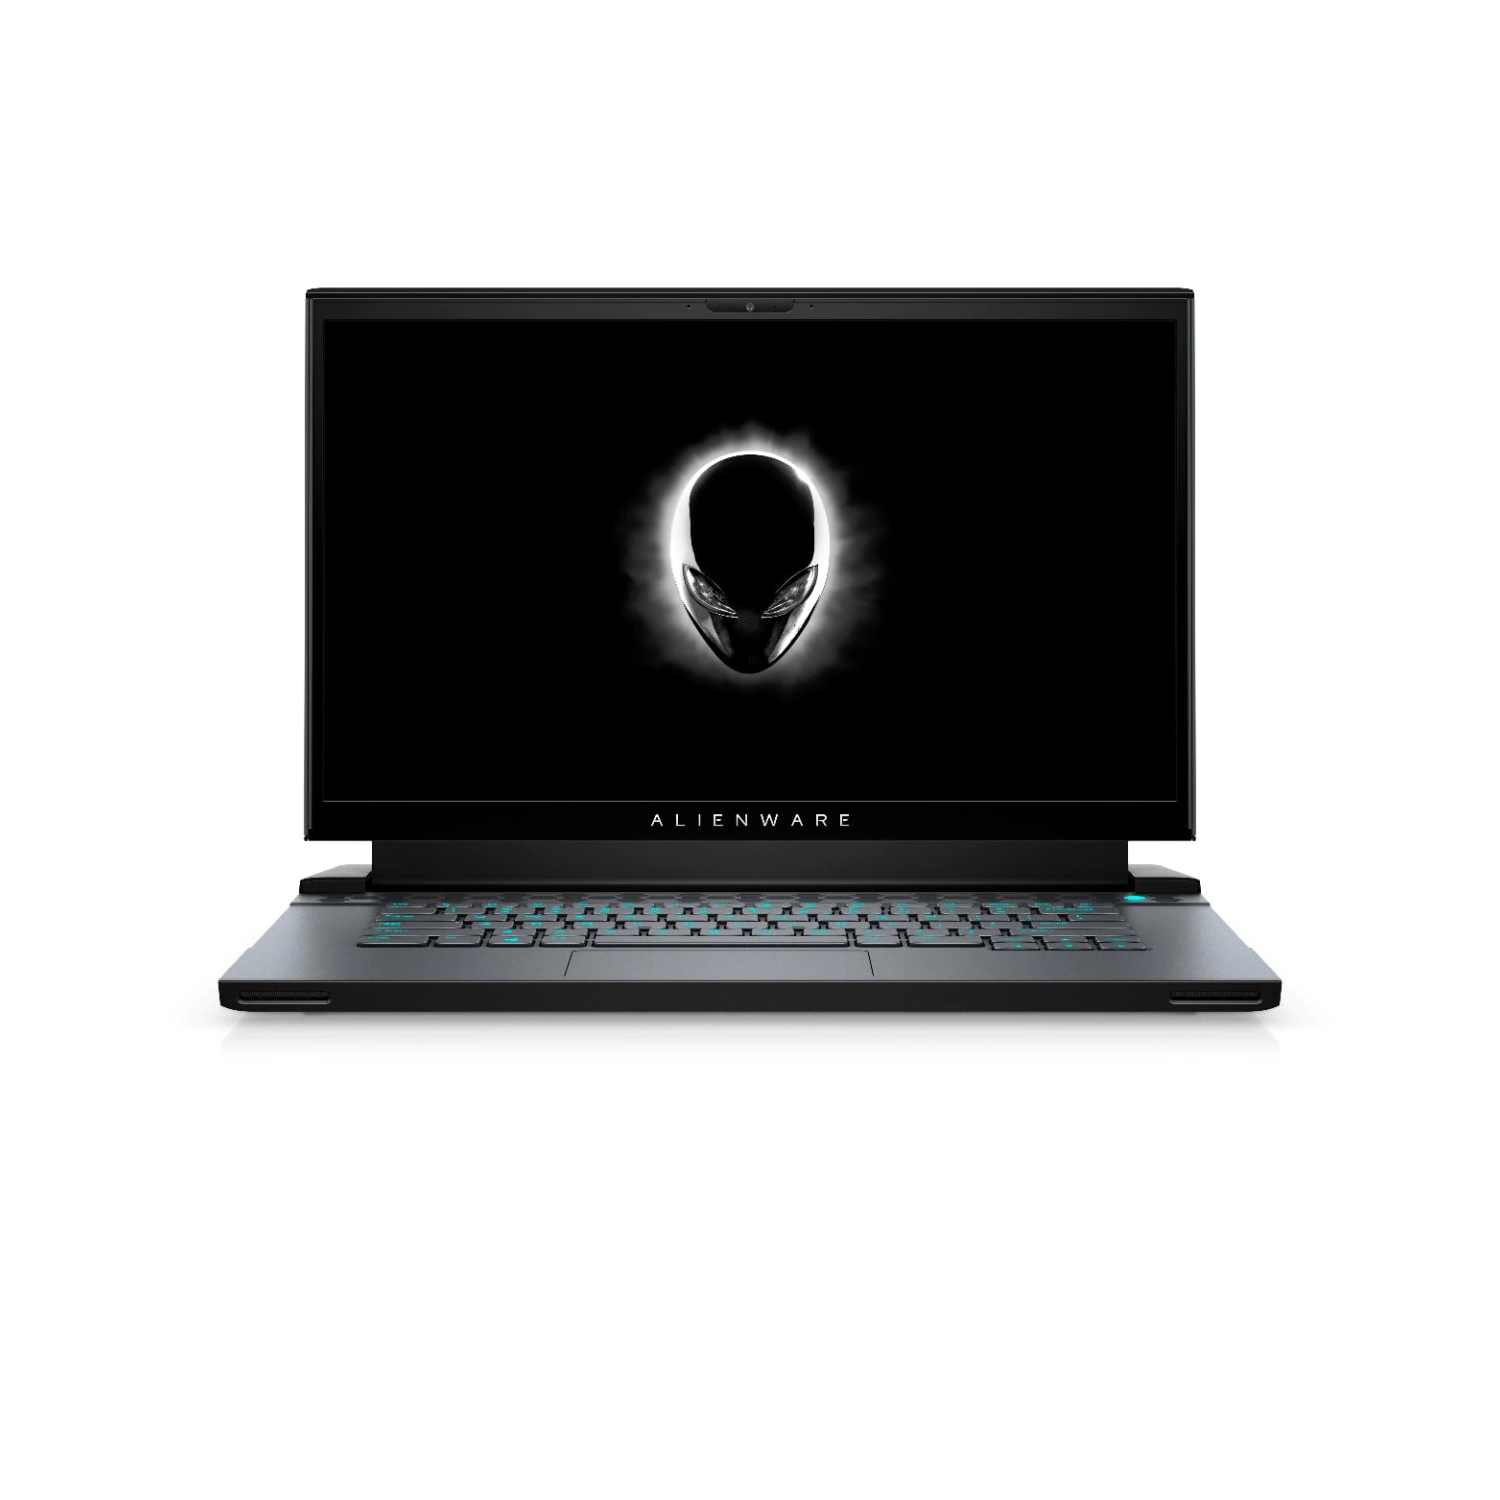 Refurbished (Excellent) - Dell Alienware m15 R4 Gaming Laptop (2021), 15.6" FHD, Core i7, 256GB SSD + 256GB SSD, 32GB RAM, RTX 3070, 5 GHz, 10th Gen CPU Certified